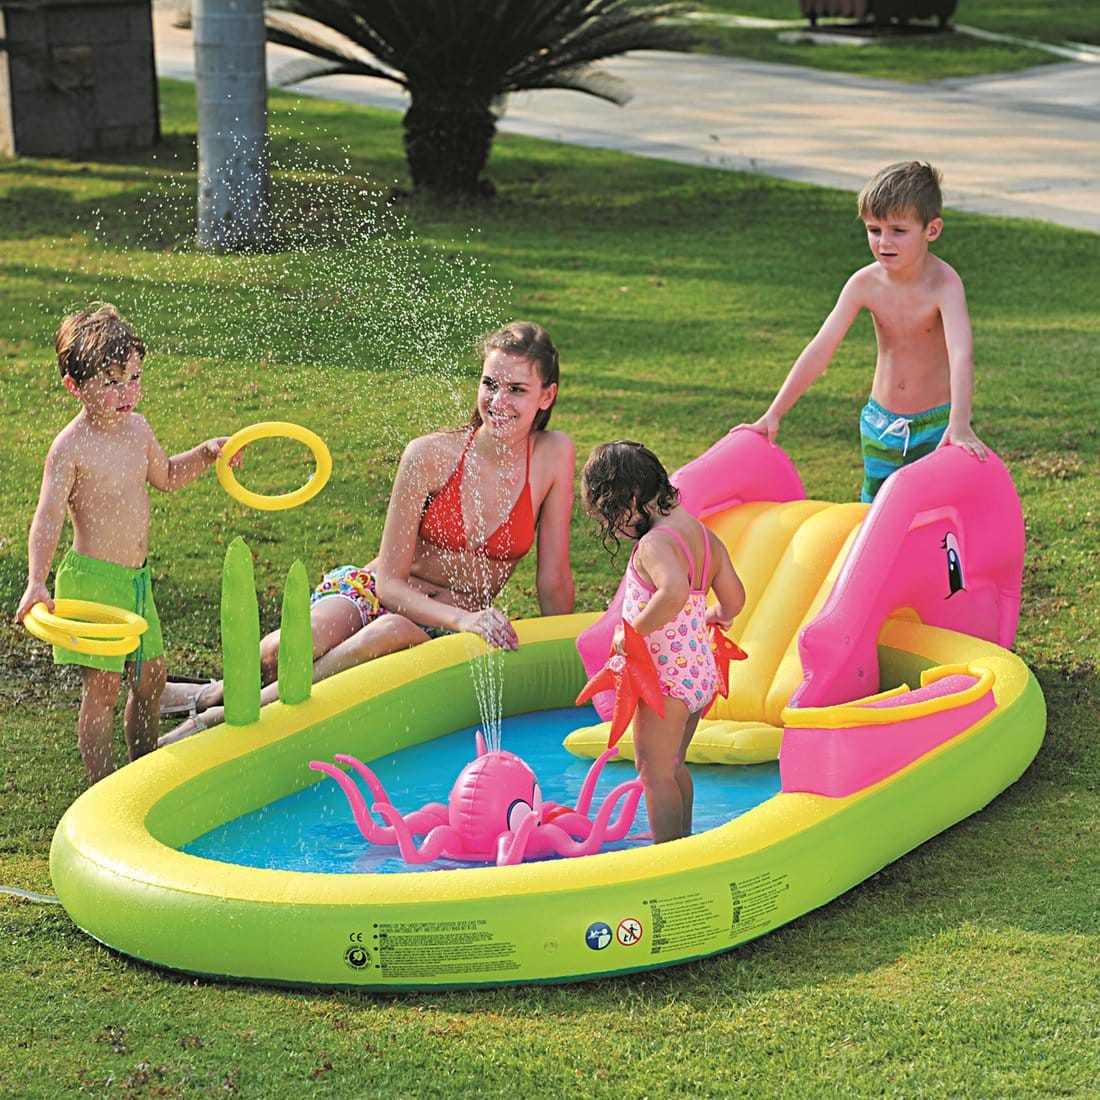 Top 10 Best Inflatable Pools in 2022 Reviews Buyer's Guide